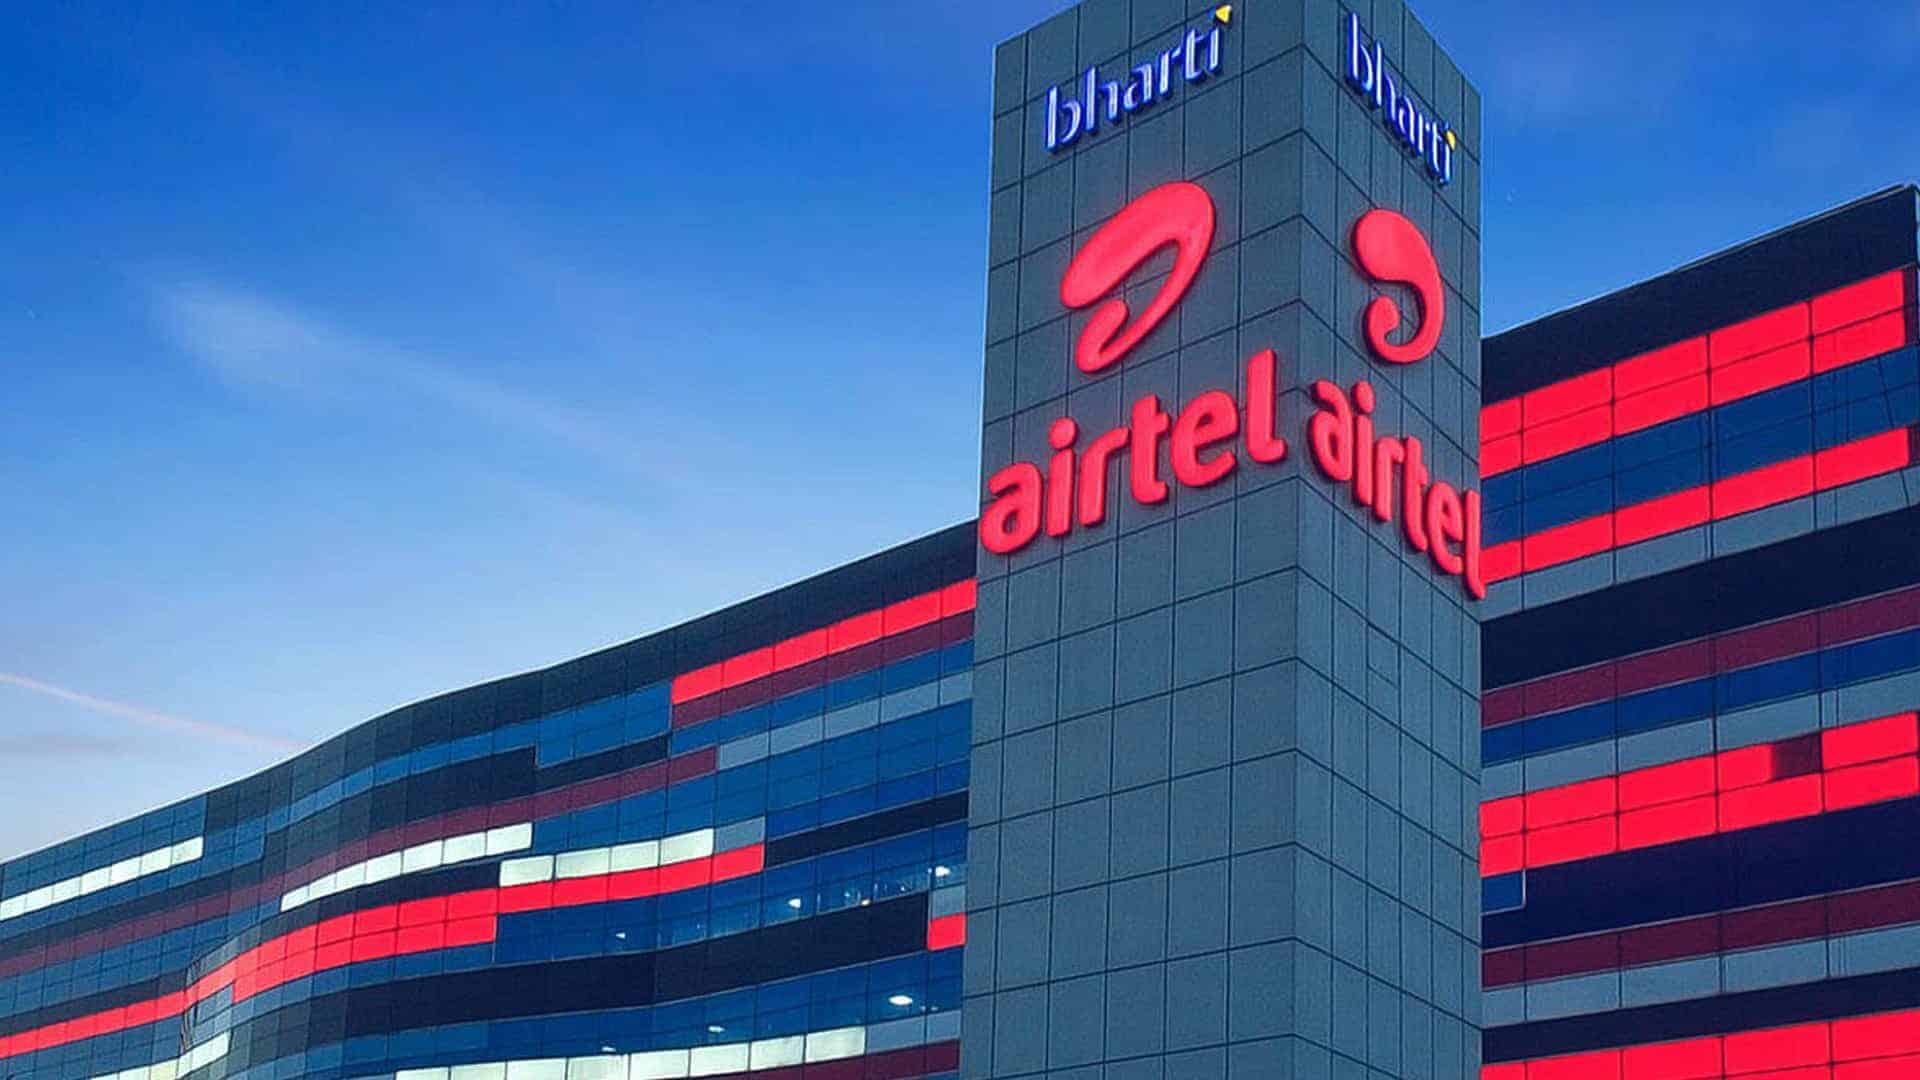 After Vodafone Idea, Airtel moves Supreme Court with review petition in AGR case